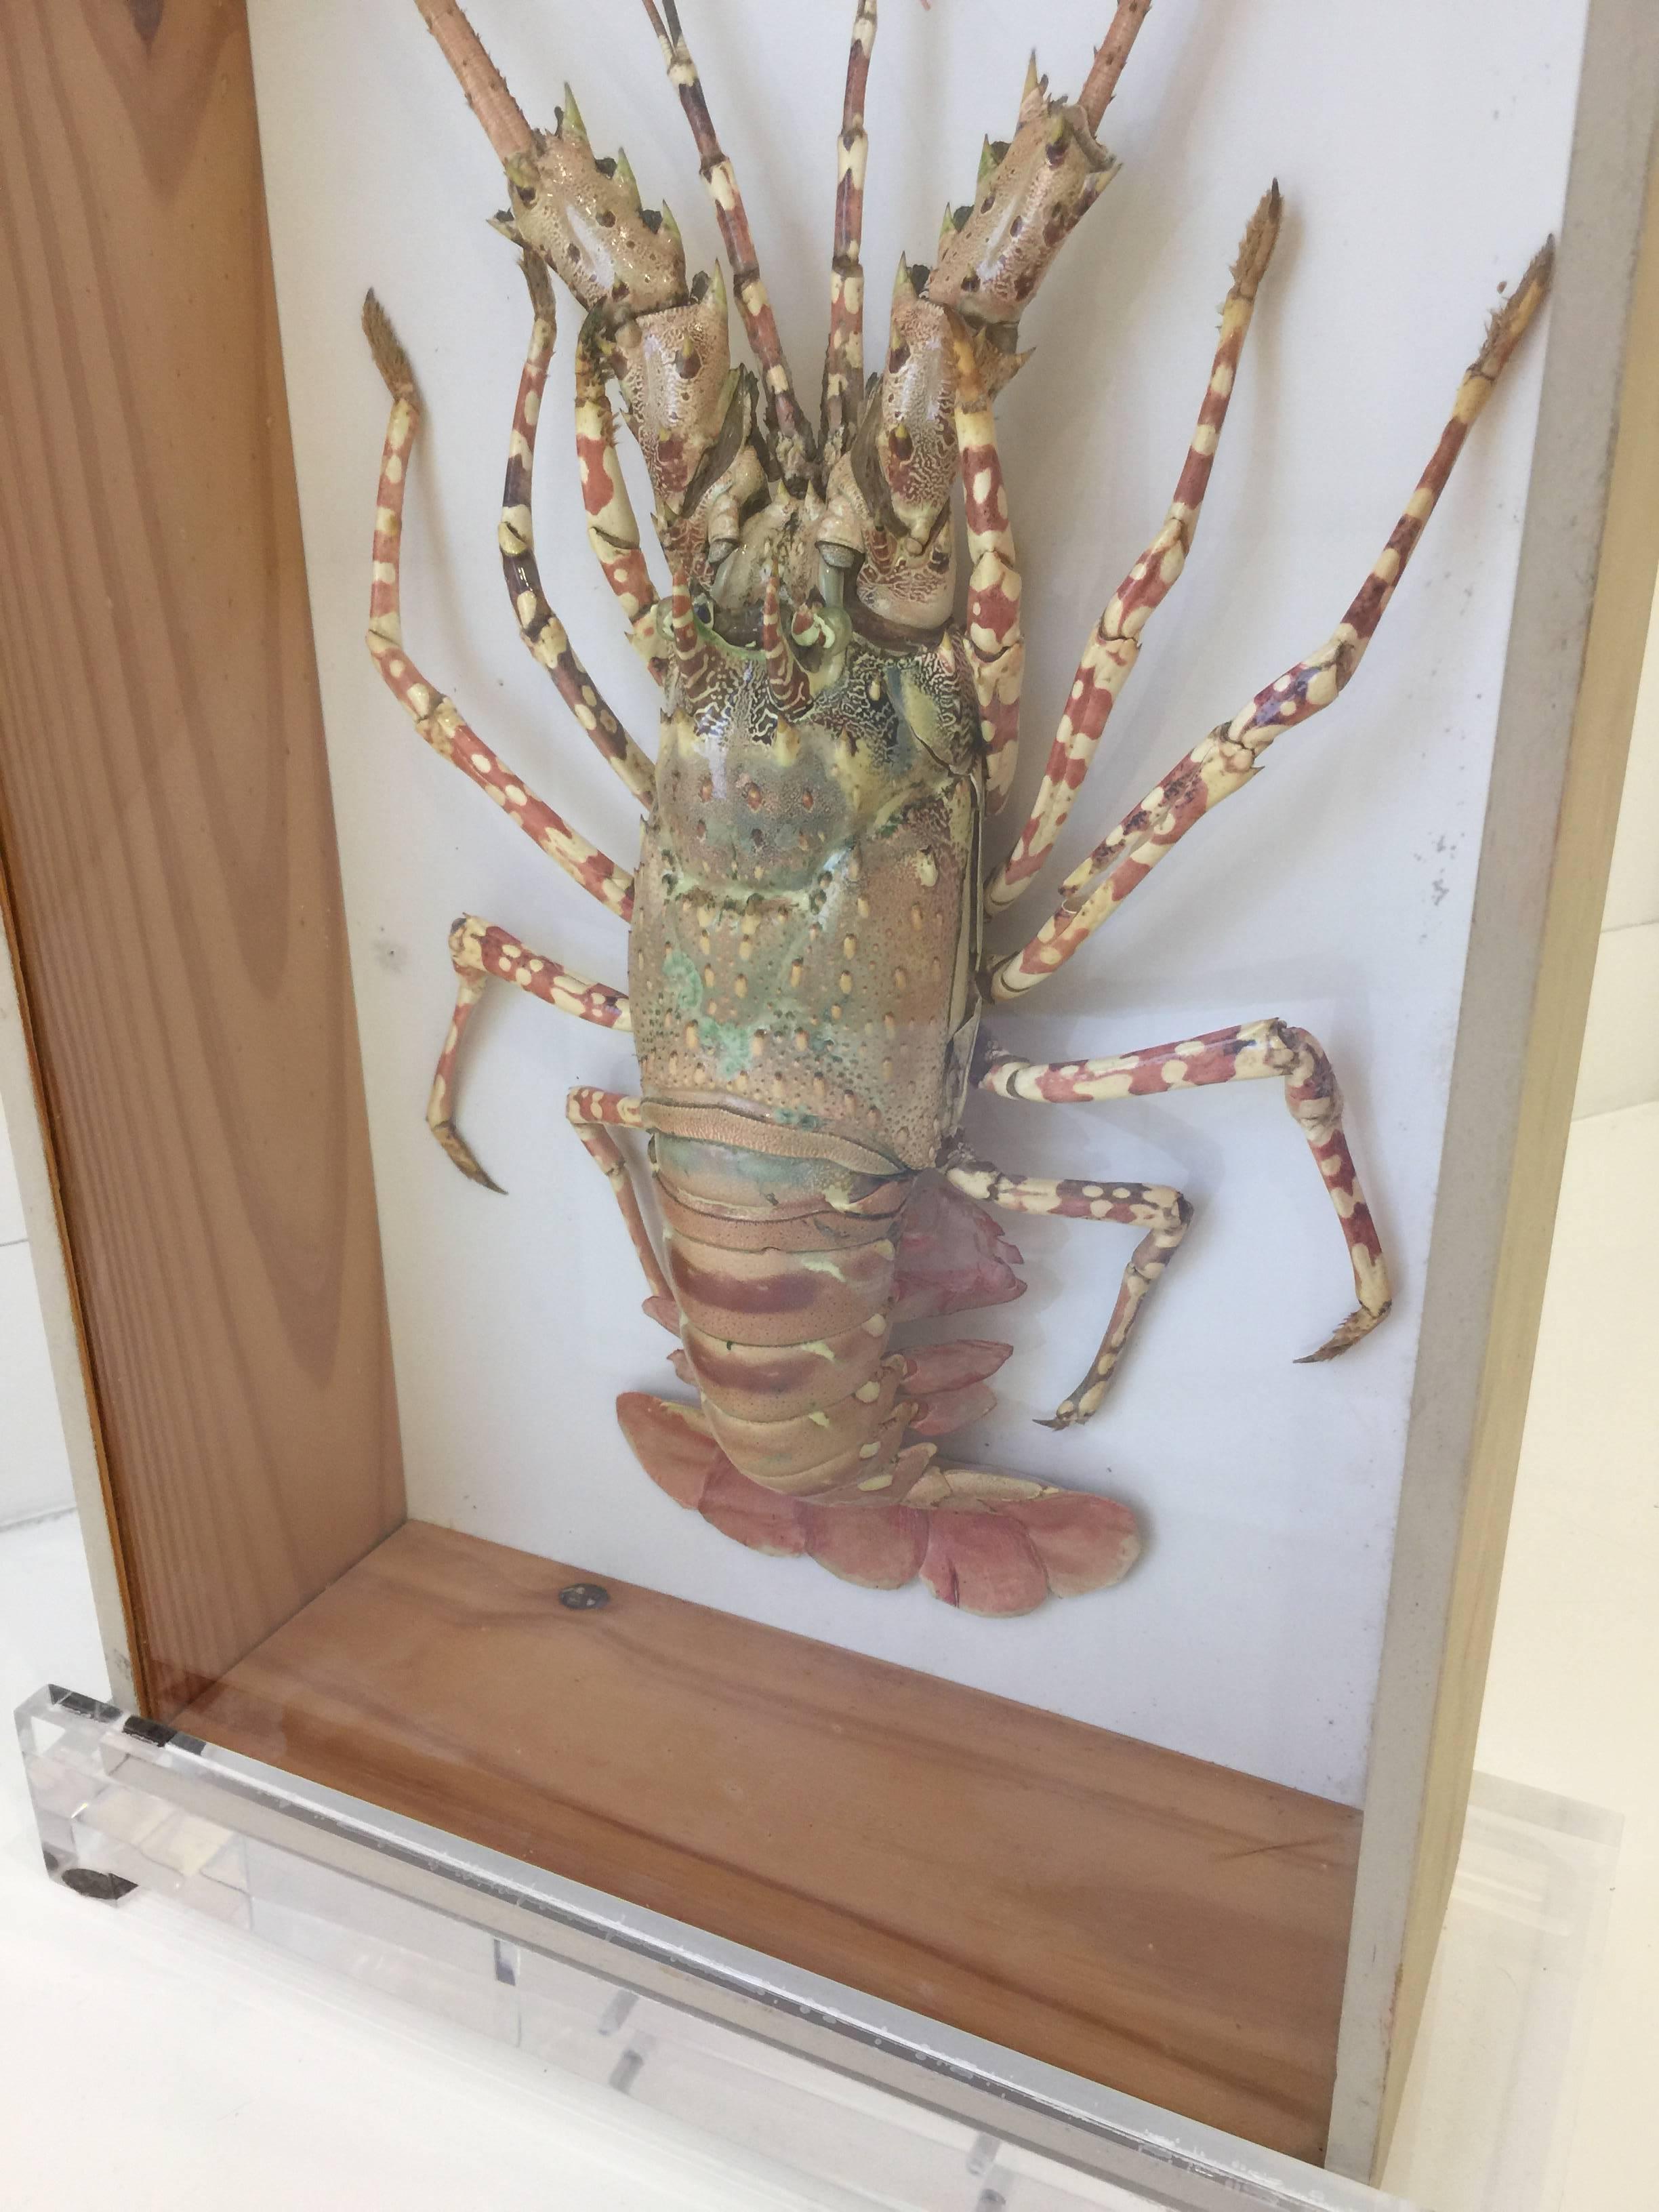 This vintage taxidermy lobster with great coloring and preserved beautifully in a shadow box. This is sold together with the custom lucite table top easel.

Note: Two of these mounted specimens are available. Priced and sold